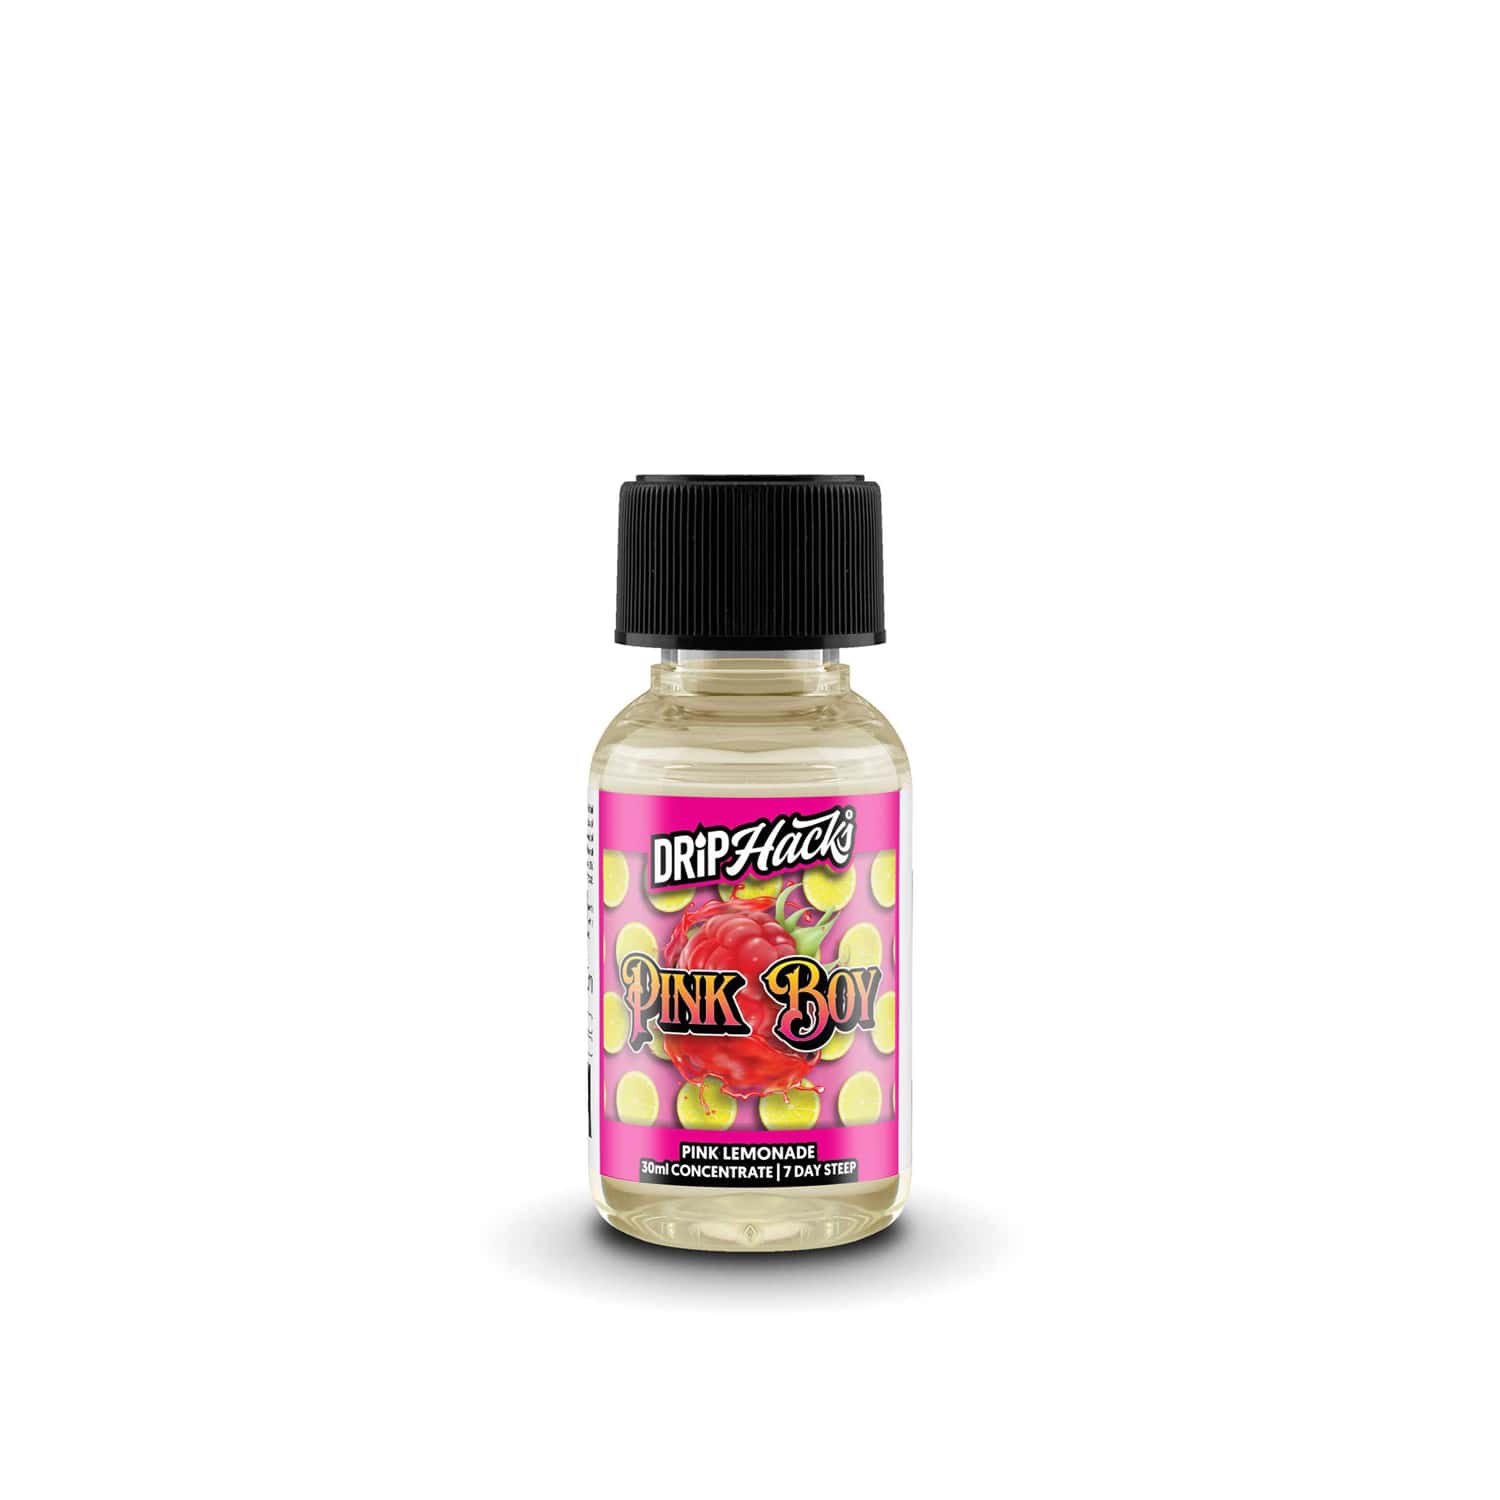 Pink Boy Flavour Concentrate by Drip Hacks